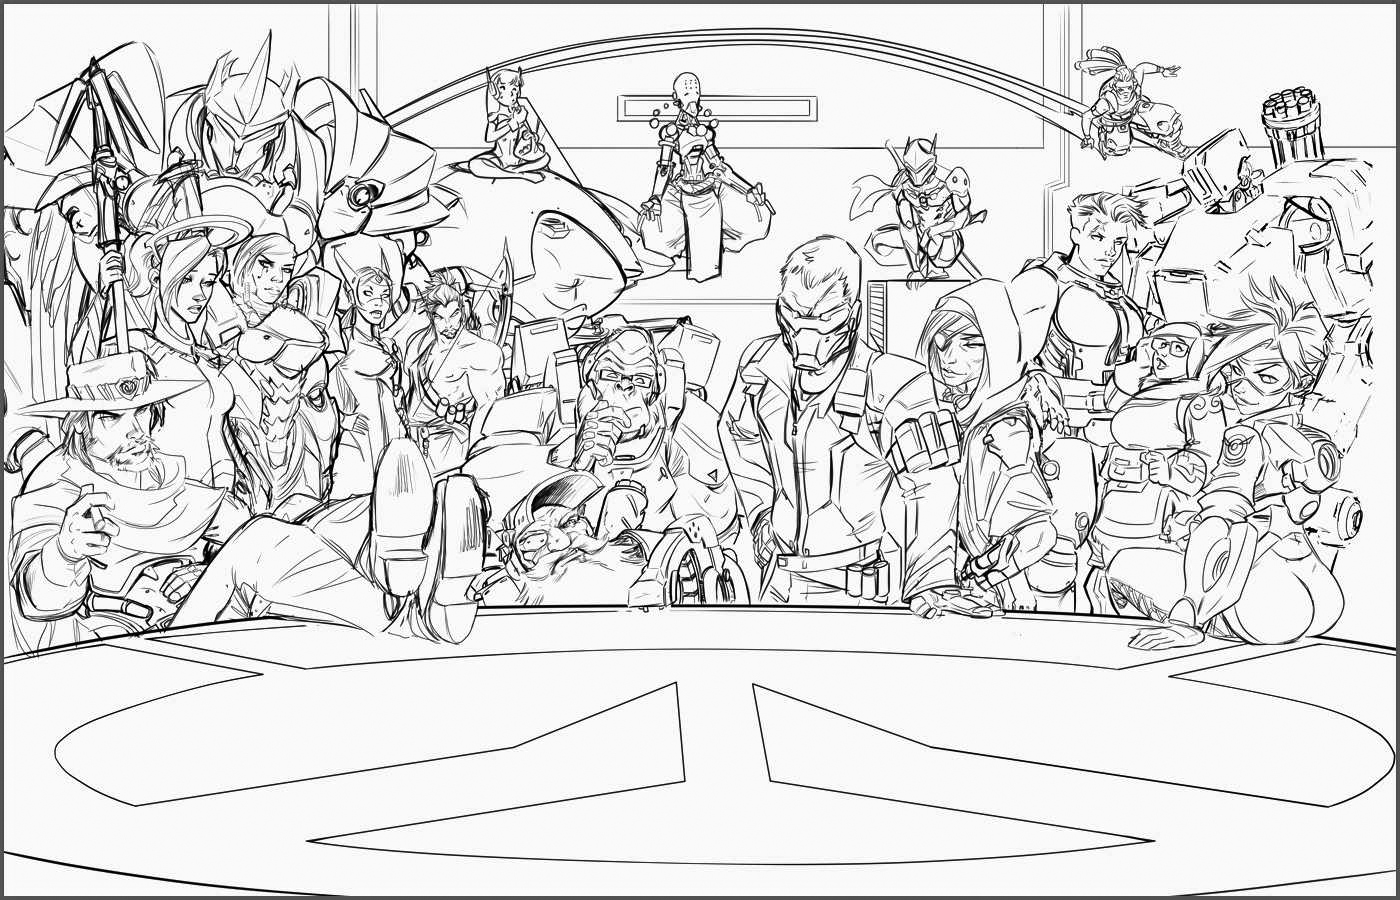 Overwatch Fan Art Coloring Pages